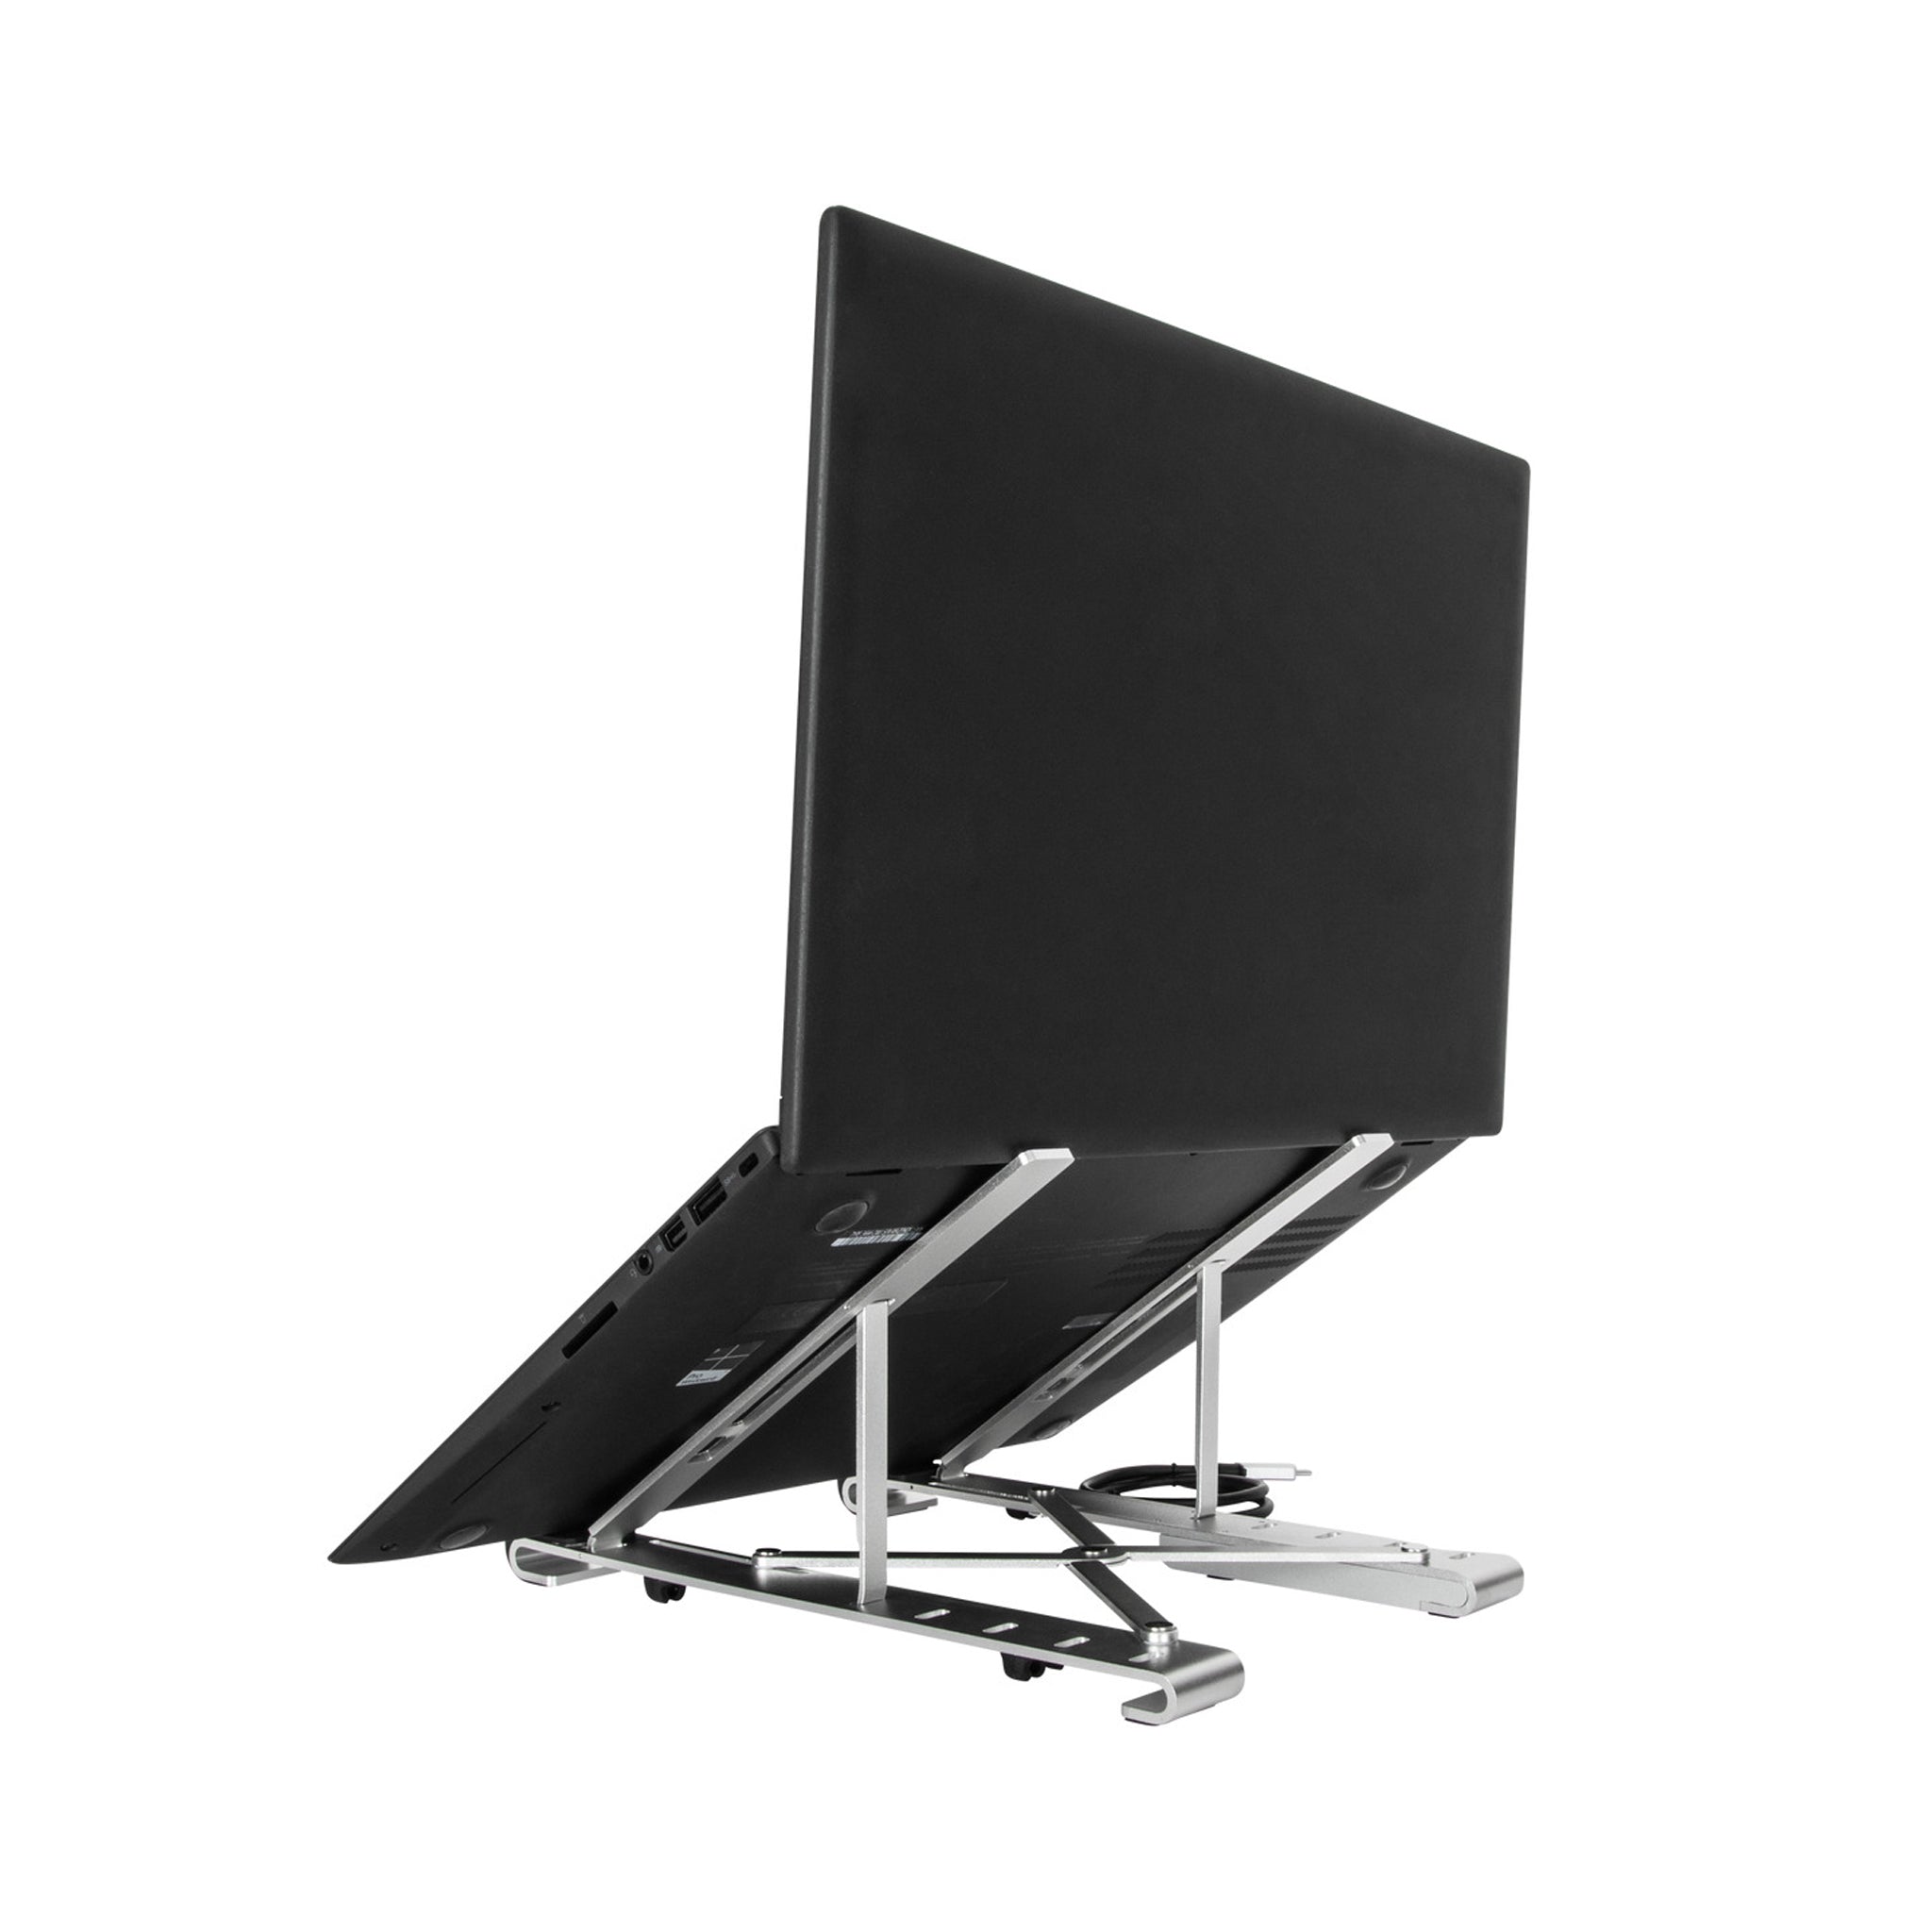 Targus AWU10005GL High Heat Reduction with Integrated Dock Portable Laptop Stand